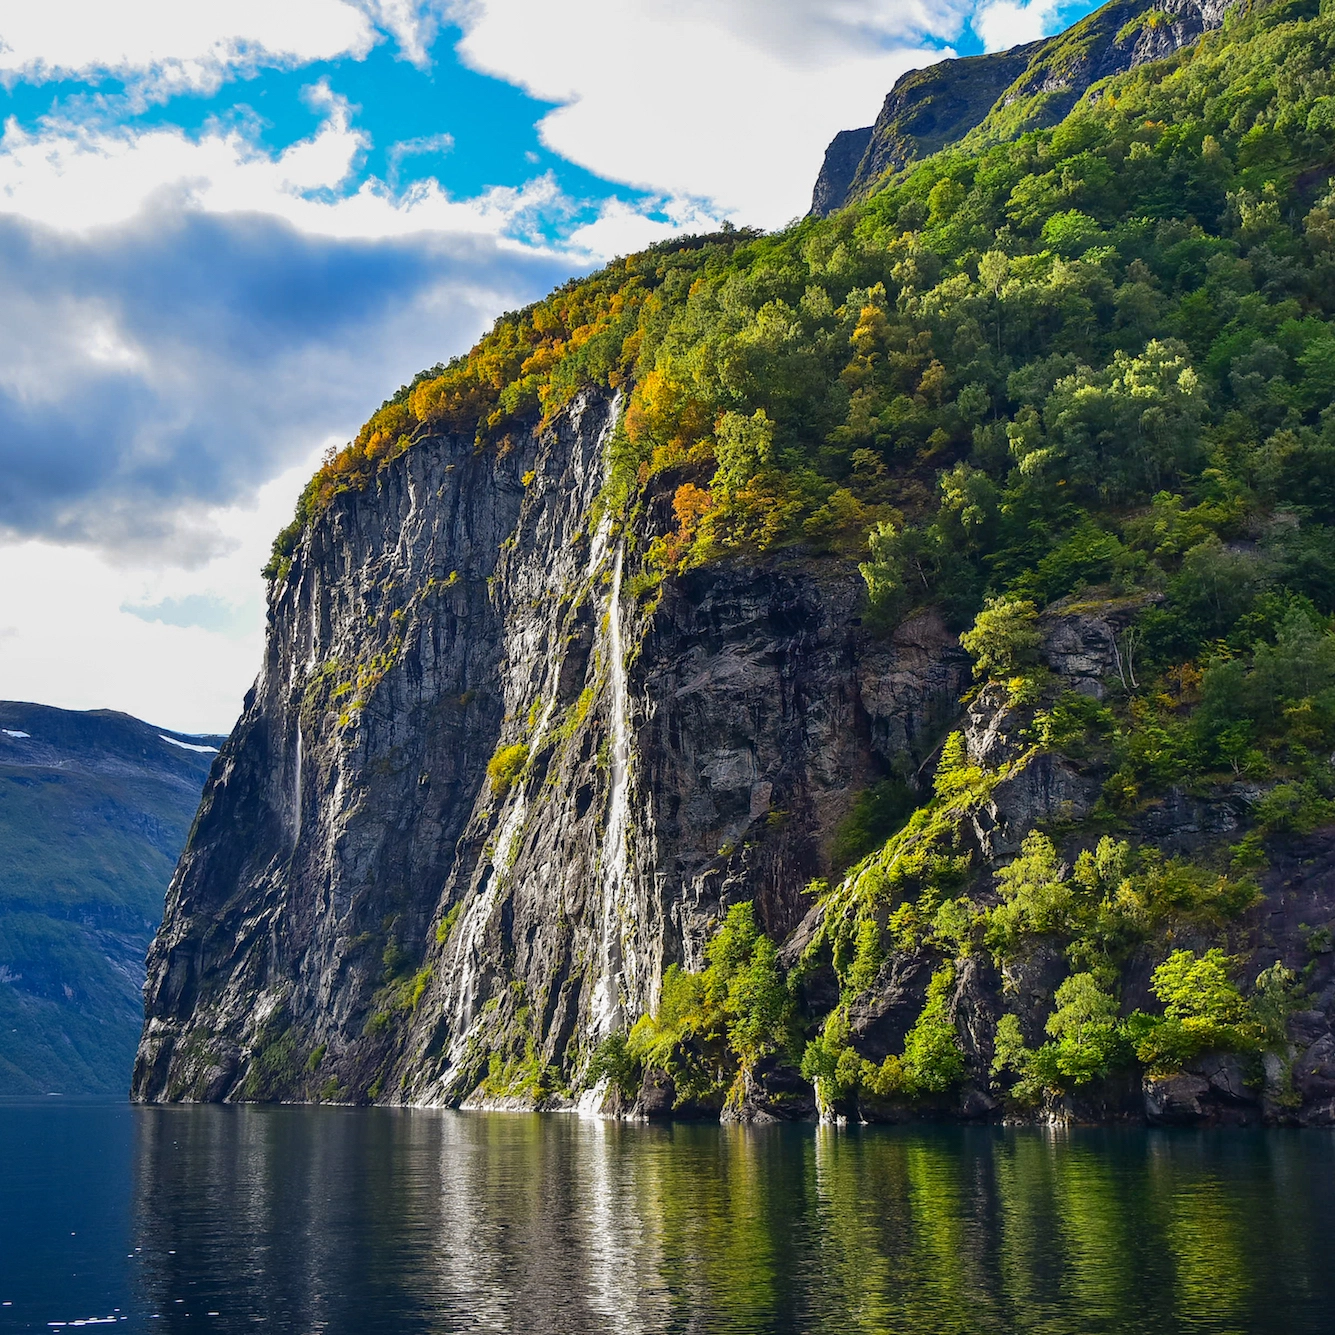 Things to do in Geiranger - Passes waterfalls on Fjordcruise on Geirangerfjorden, Geiranger, Norwegen